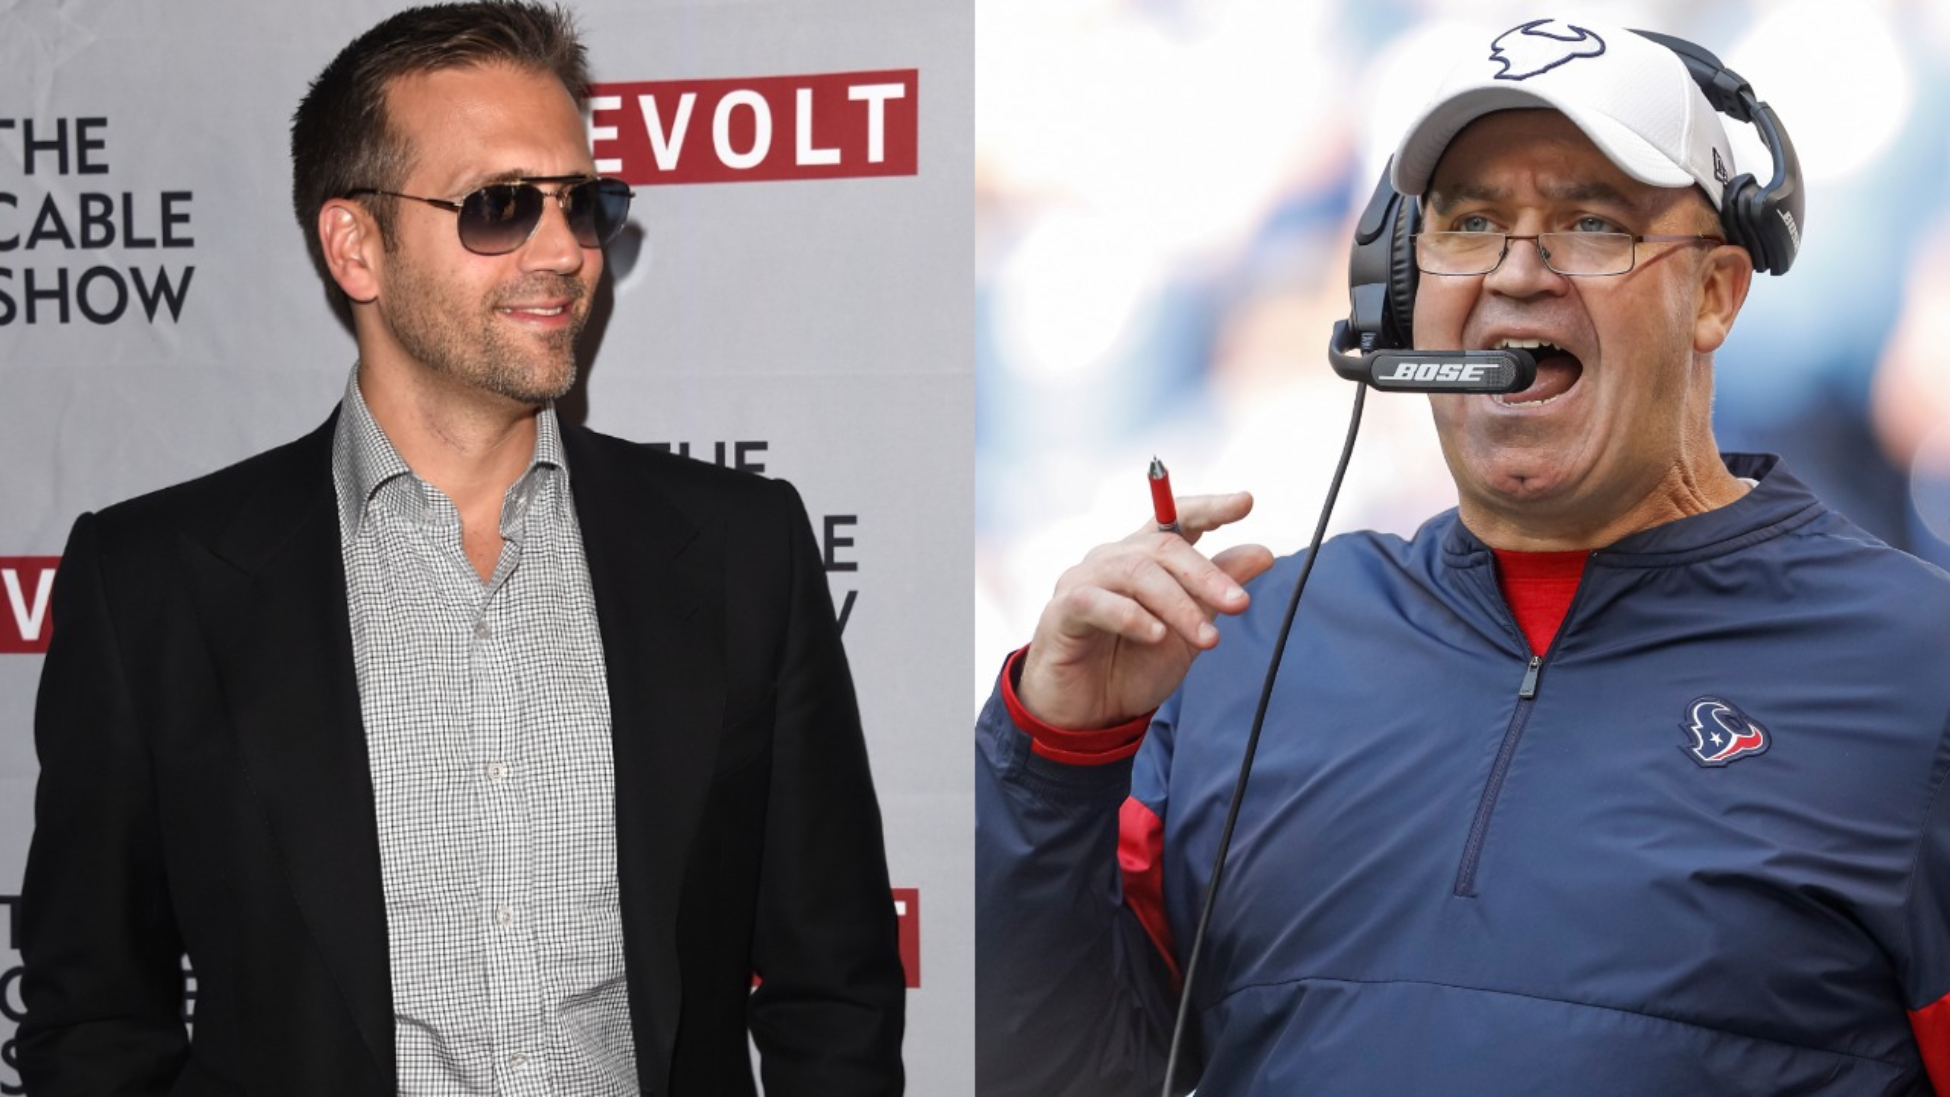 While some question if Bill O'Brien deserved to get fired by the Houston Texans. ESPN's Max Kellerman firmly believes he deserves his fate.